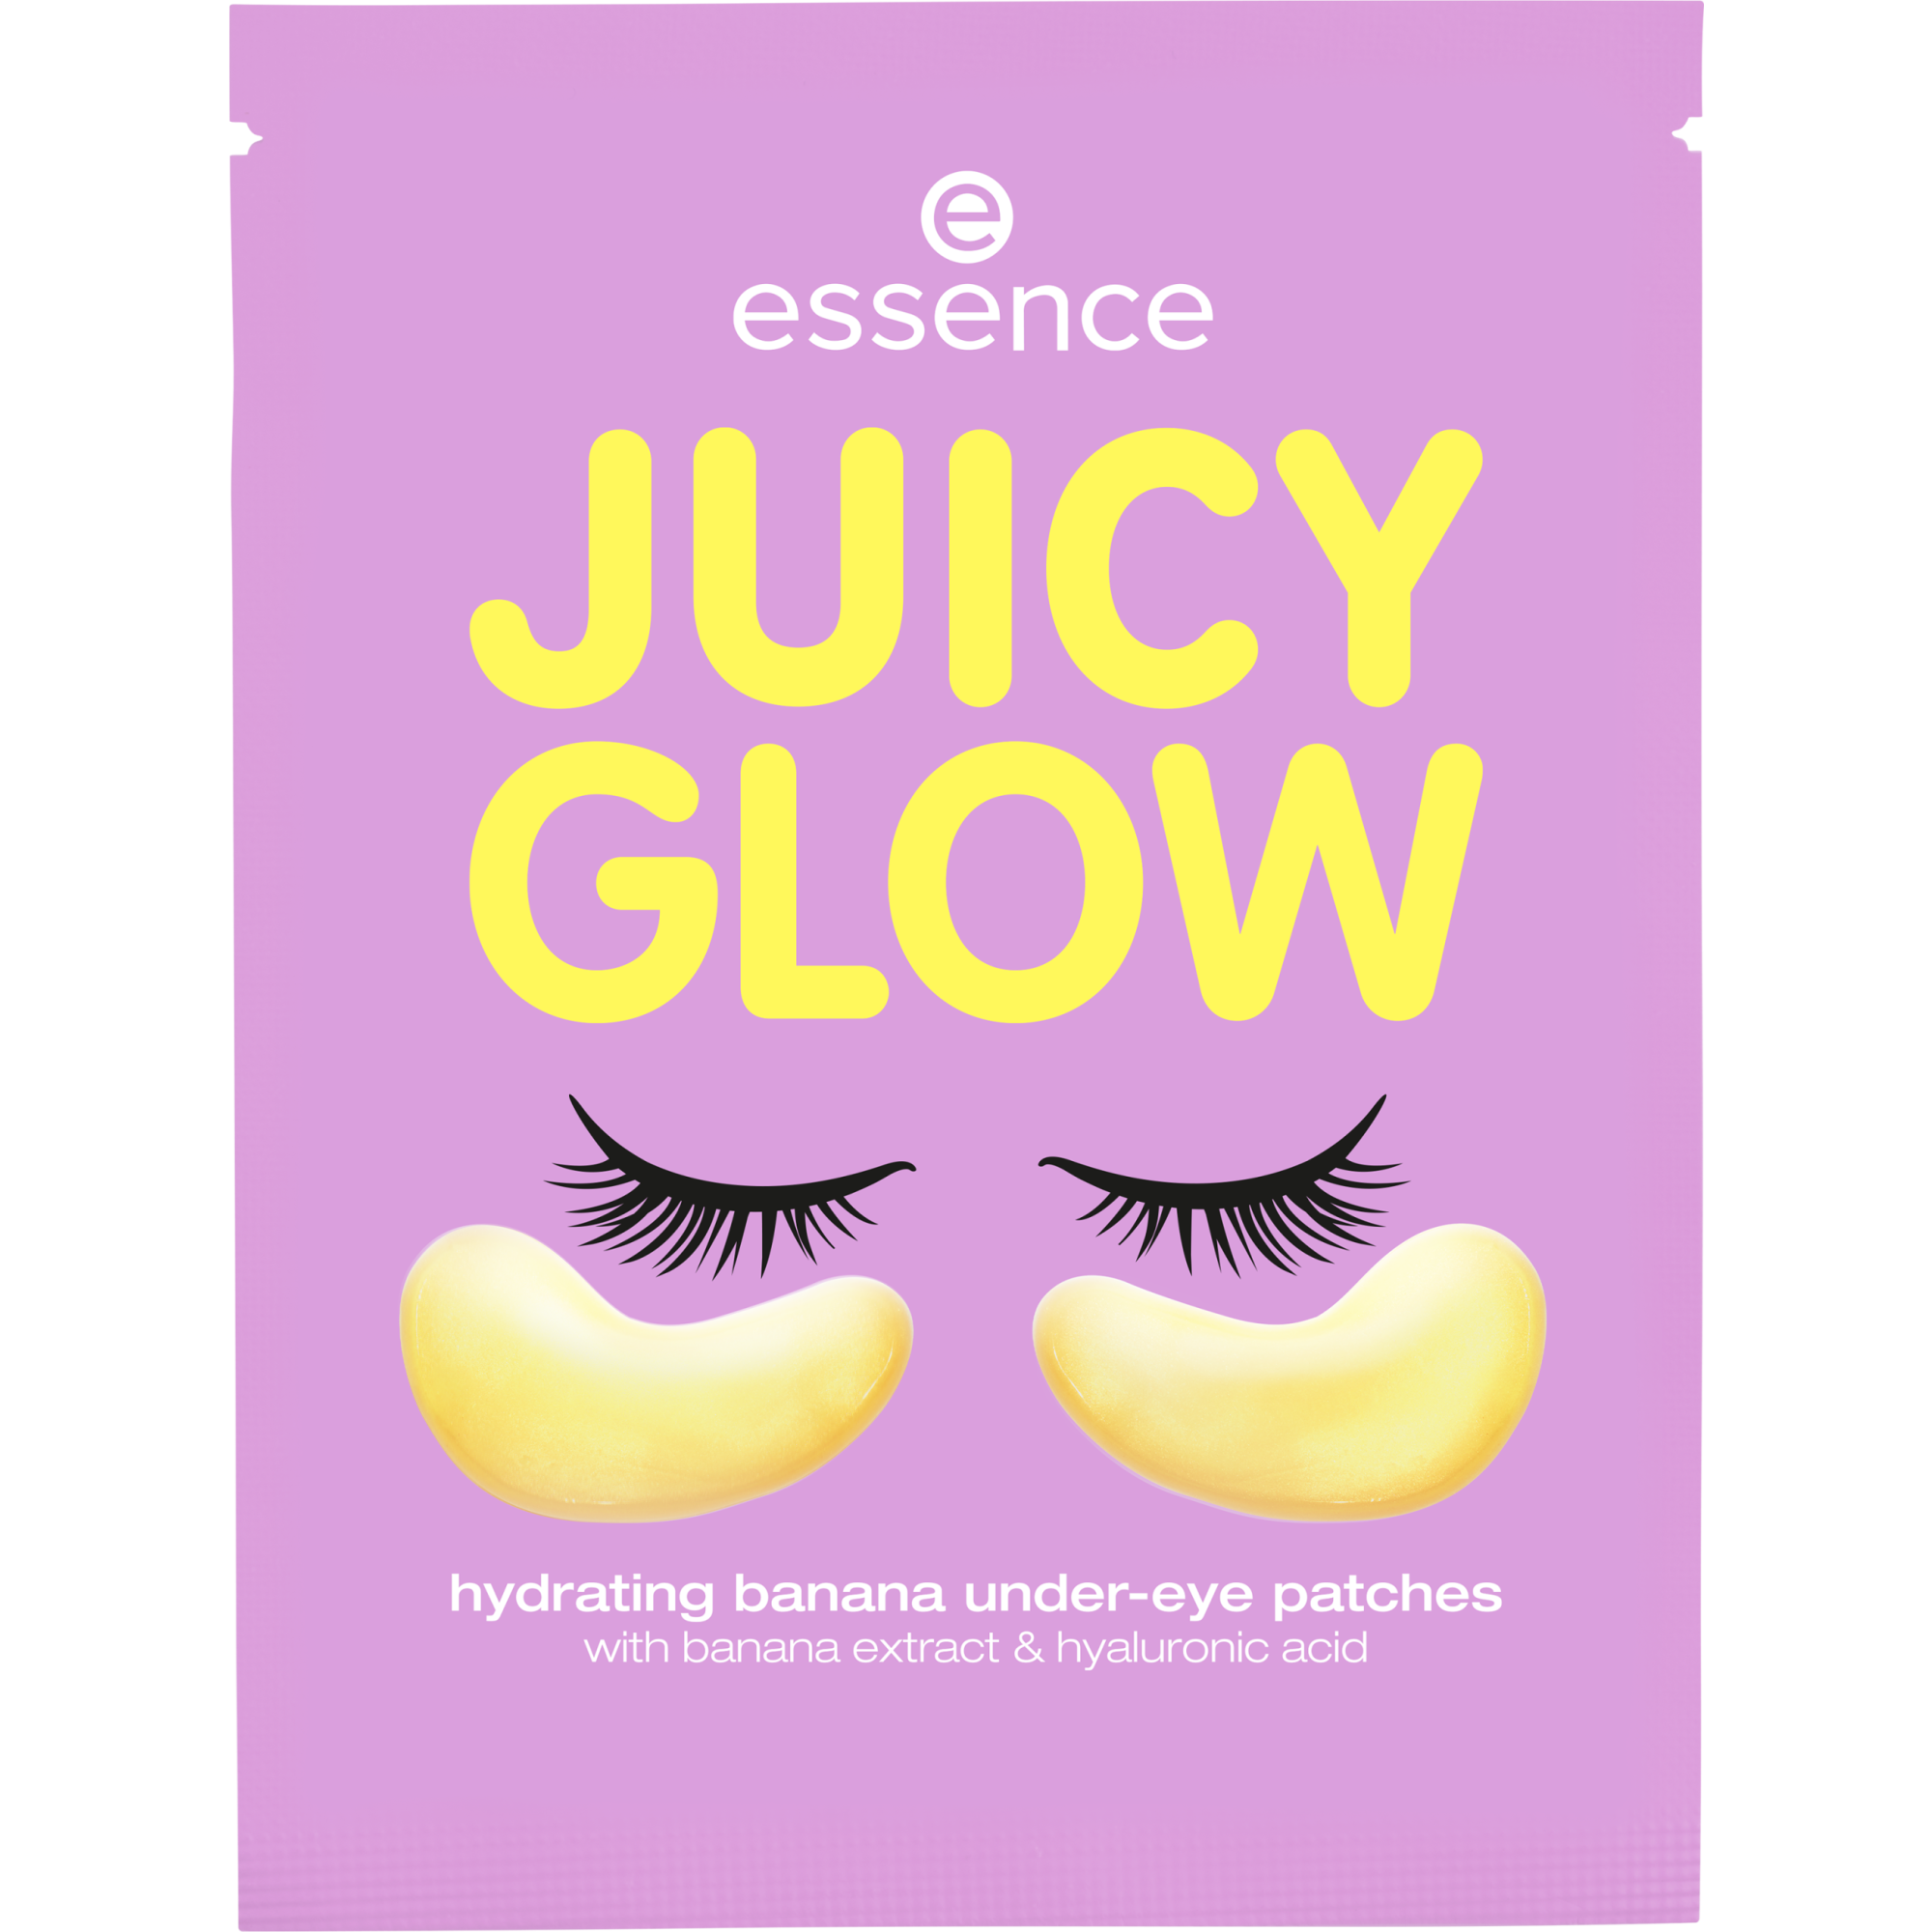 JUICY GLOW hydrating banana under-eye patches